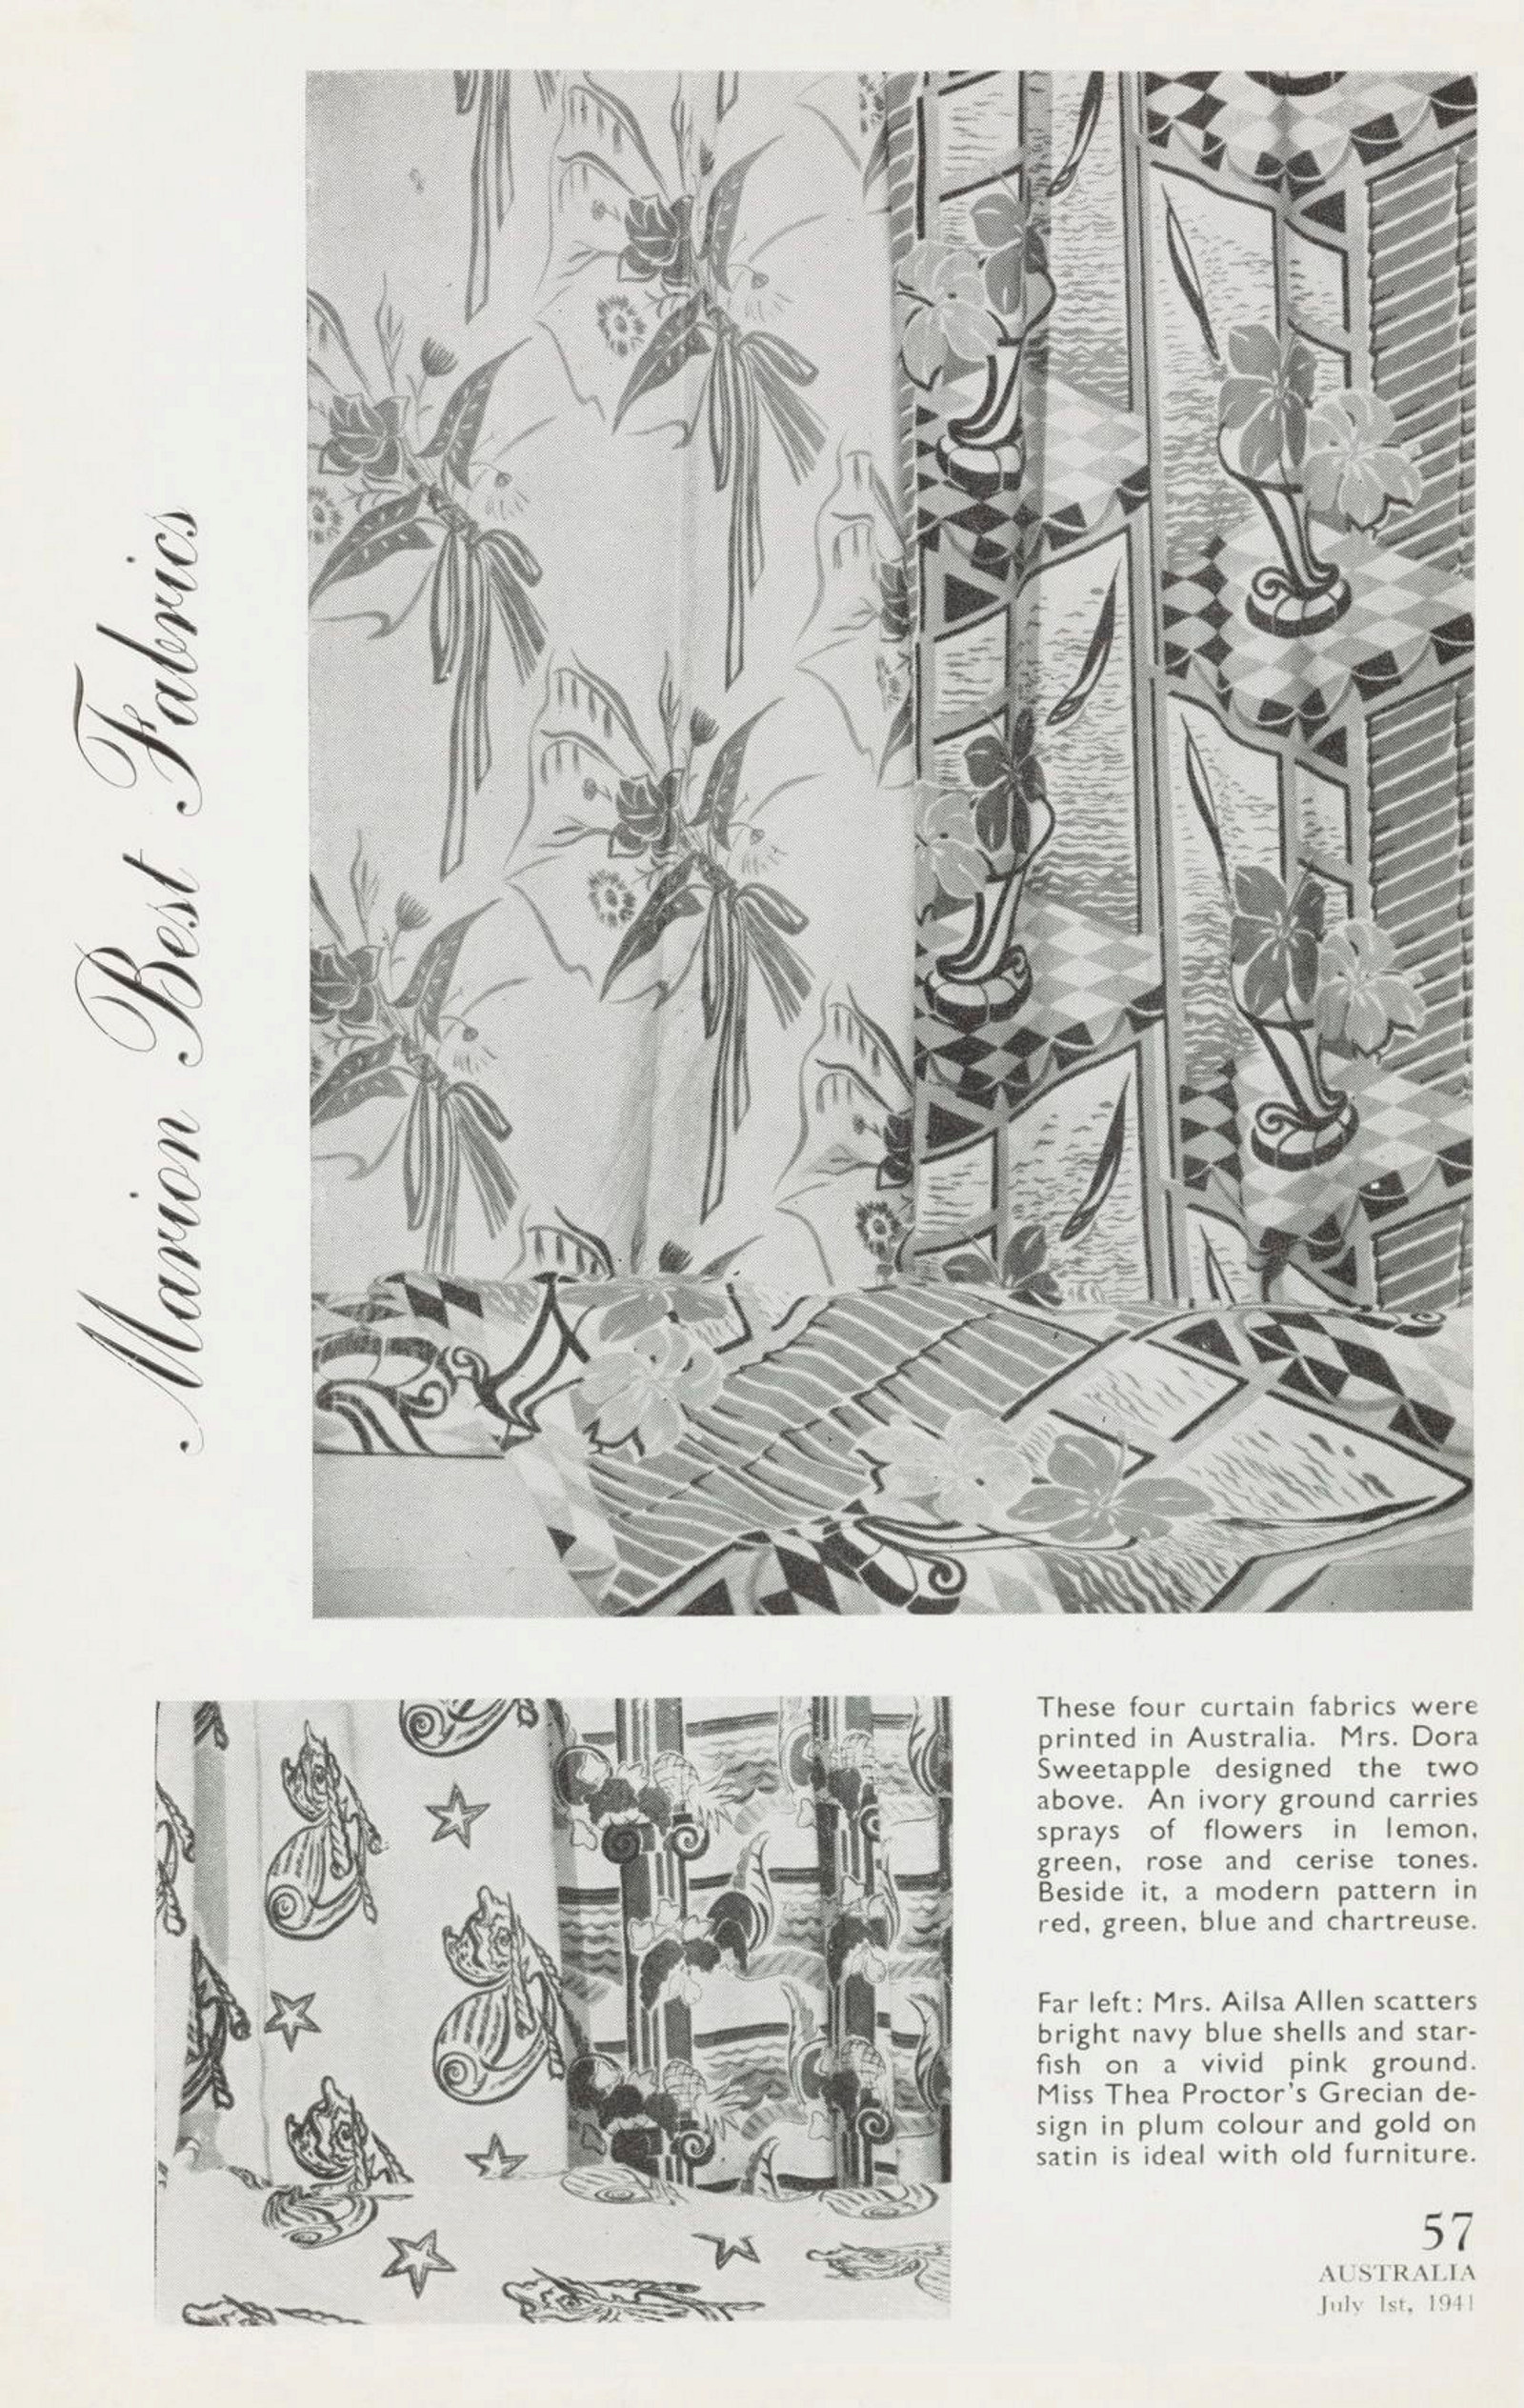 Advertisement for Marion Best Fabrics, in Australia: National Journal, July 1941, p.57